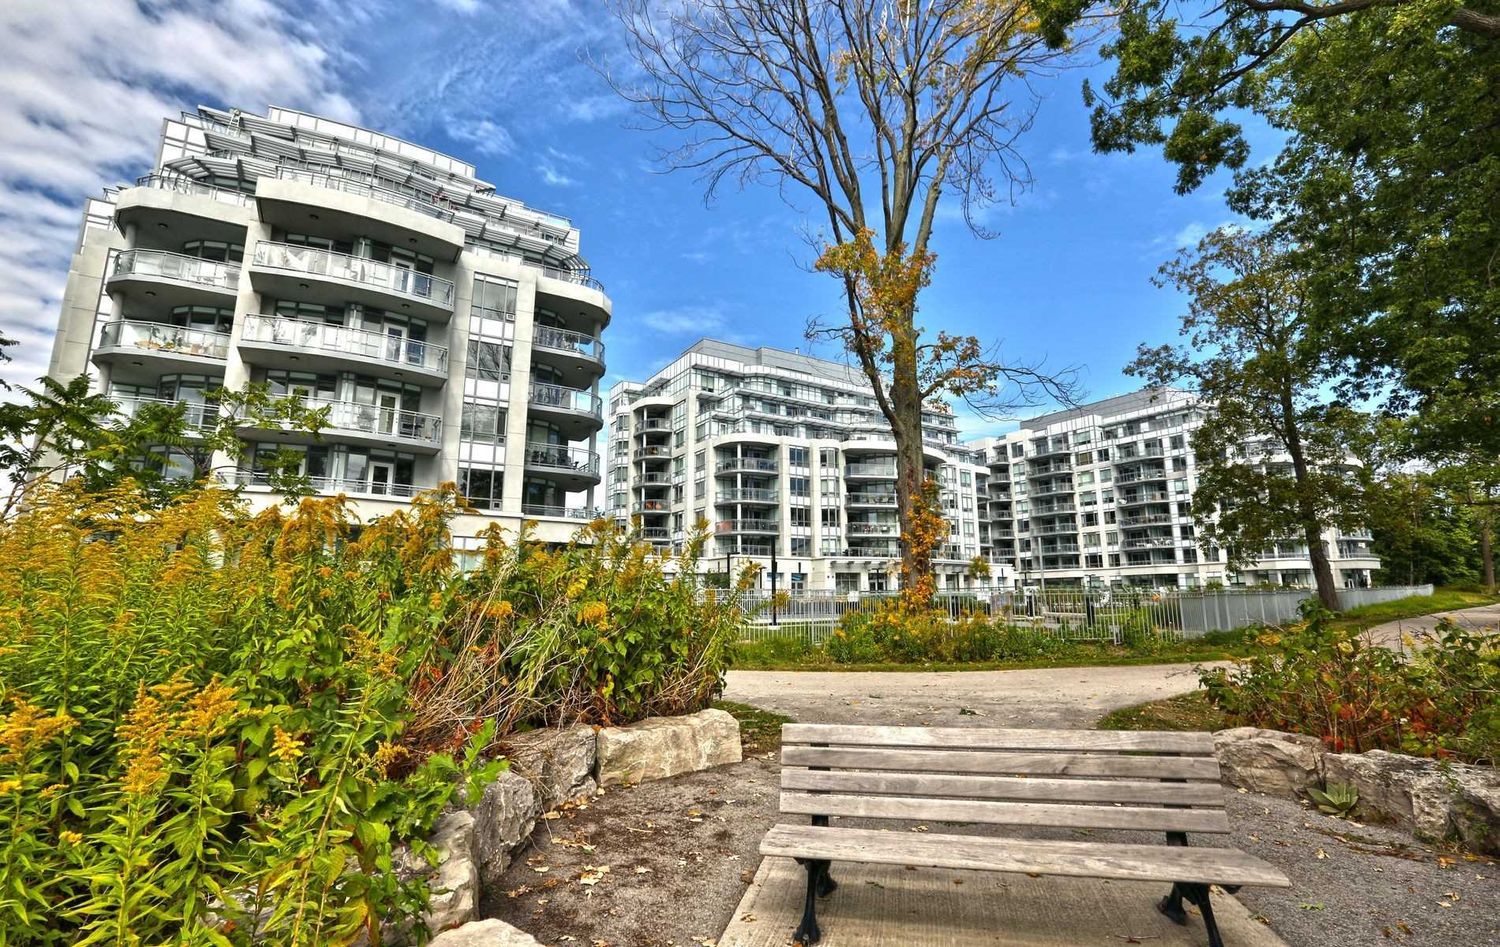 3500 Lakeshore Road W. Bluwater Condos is located in  Oakville, Toronto - image #2 of 3